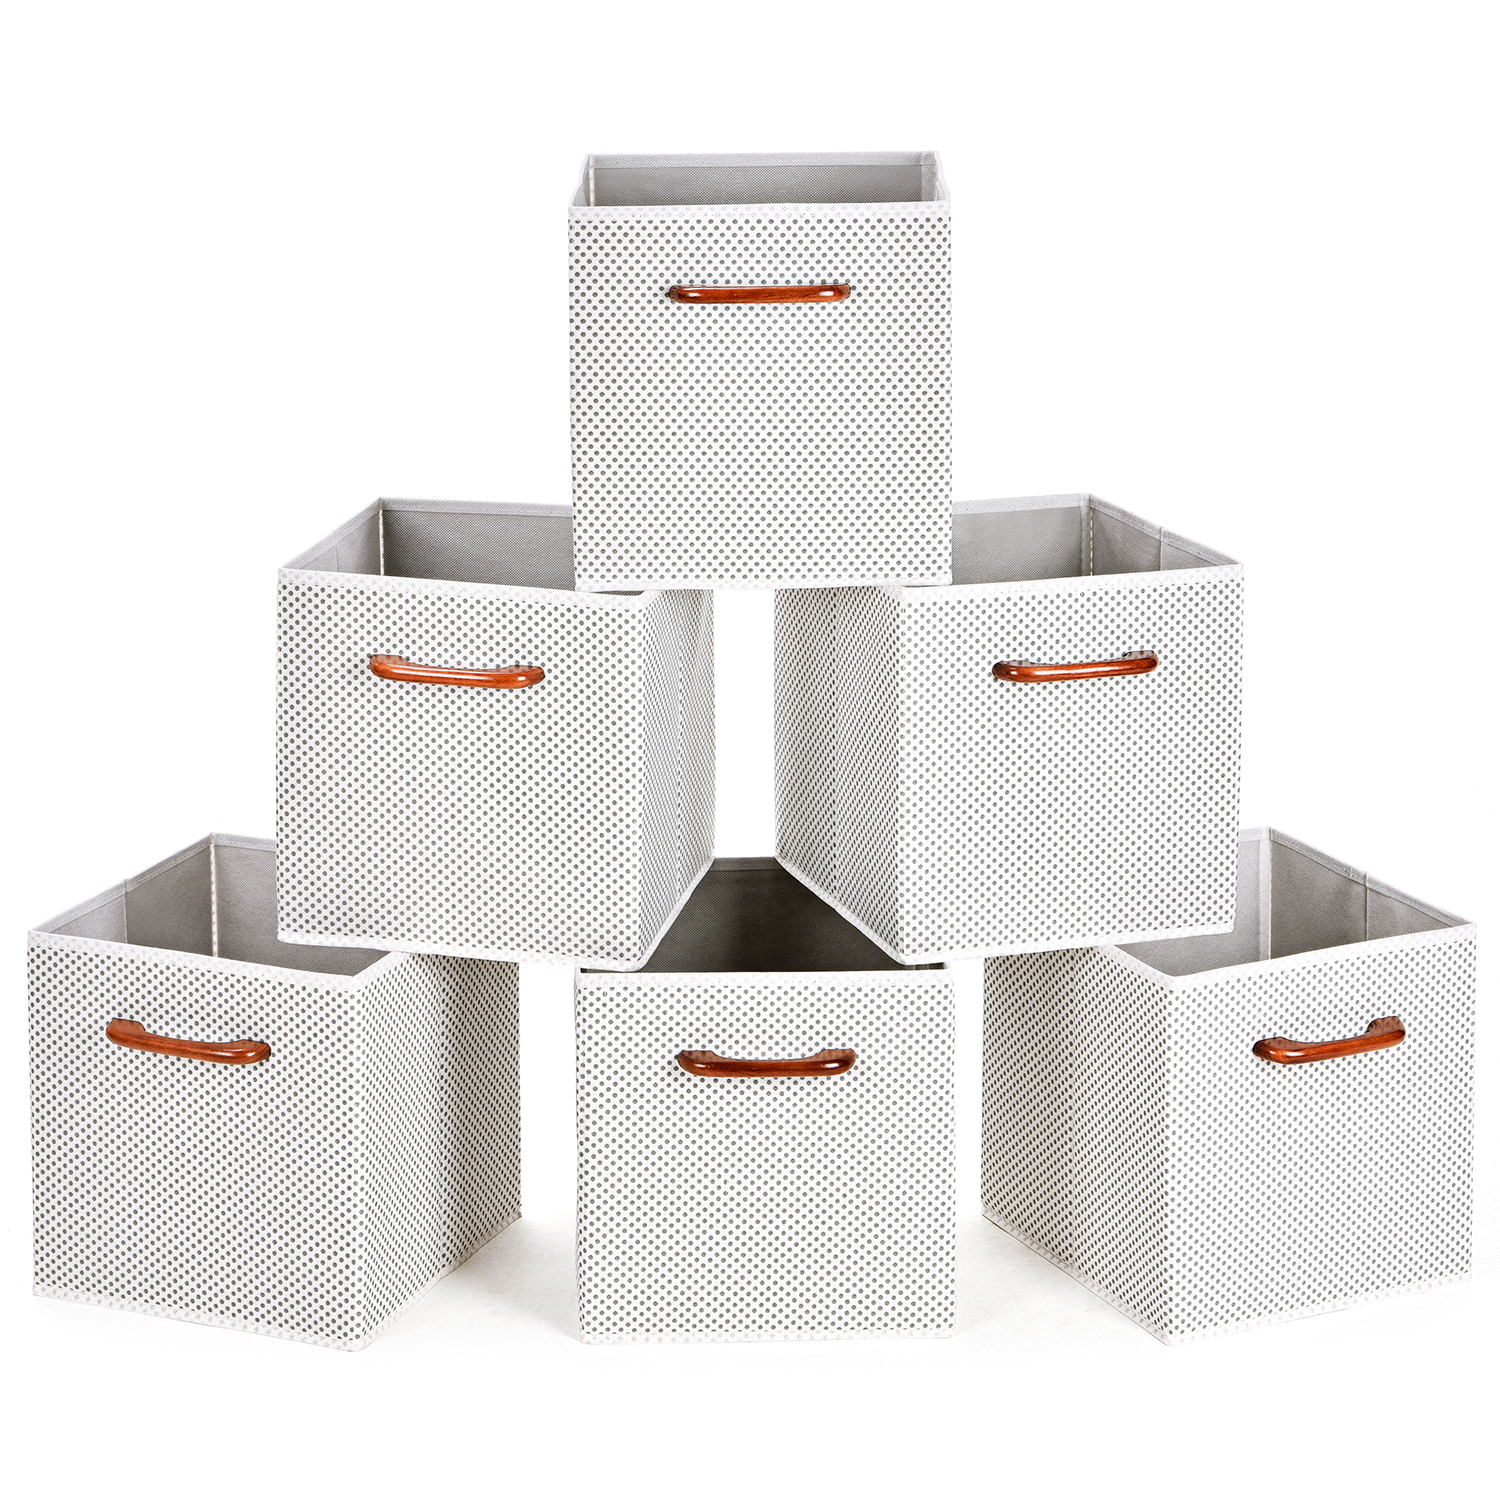 Collapsible Storage Cubes Maidmax Set Of 6 Foldable Fabric Storage inside size 1500 X 1500